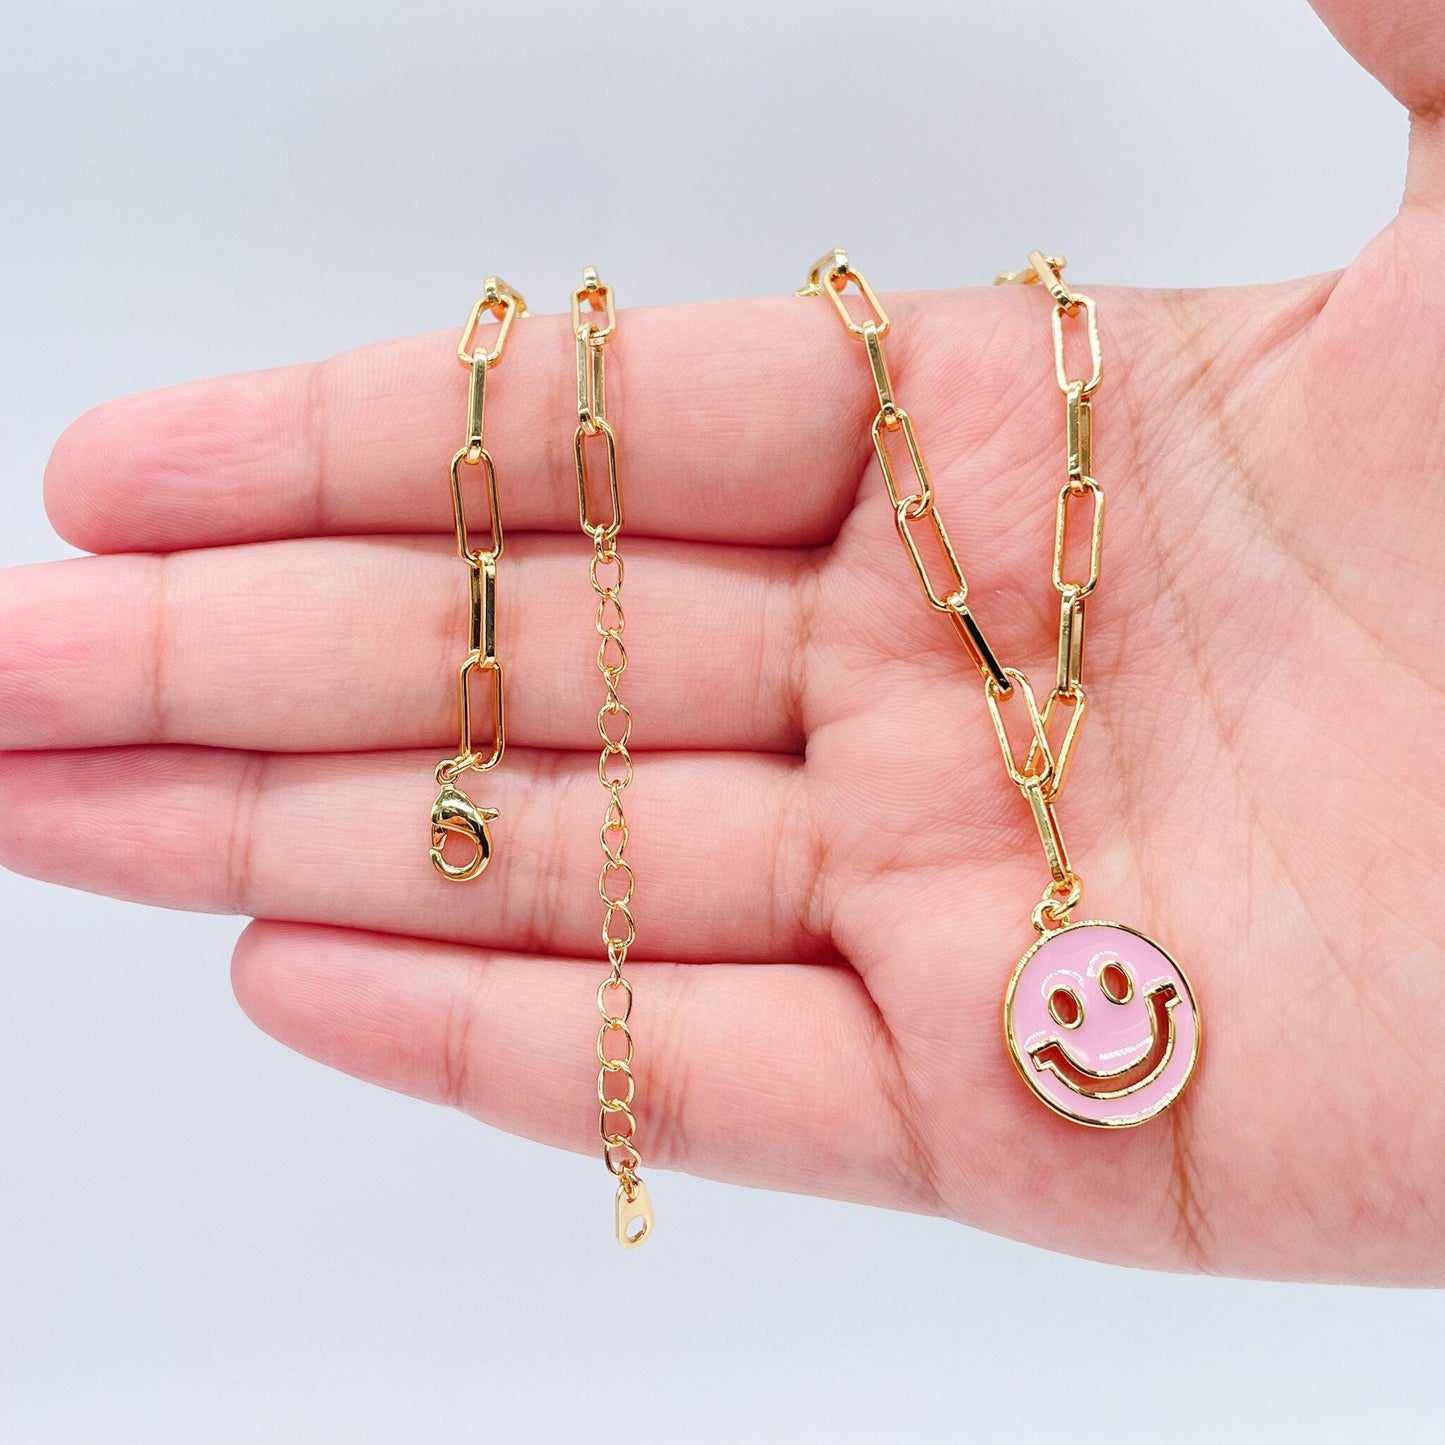 18k Gold Layered Colorful Smiling Face Set with Paper Clip Chain and Dangling